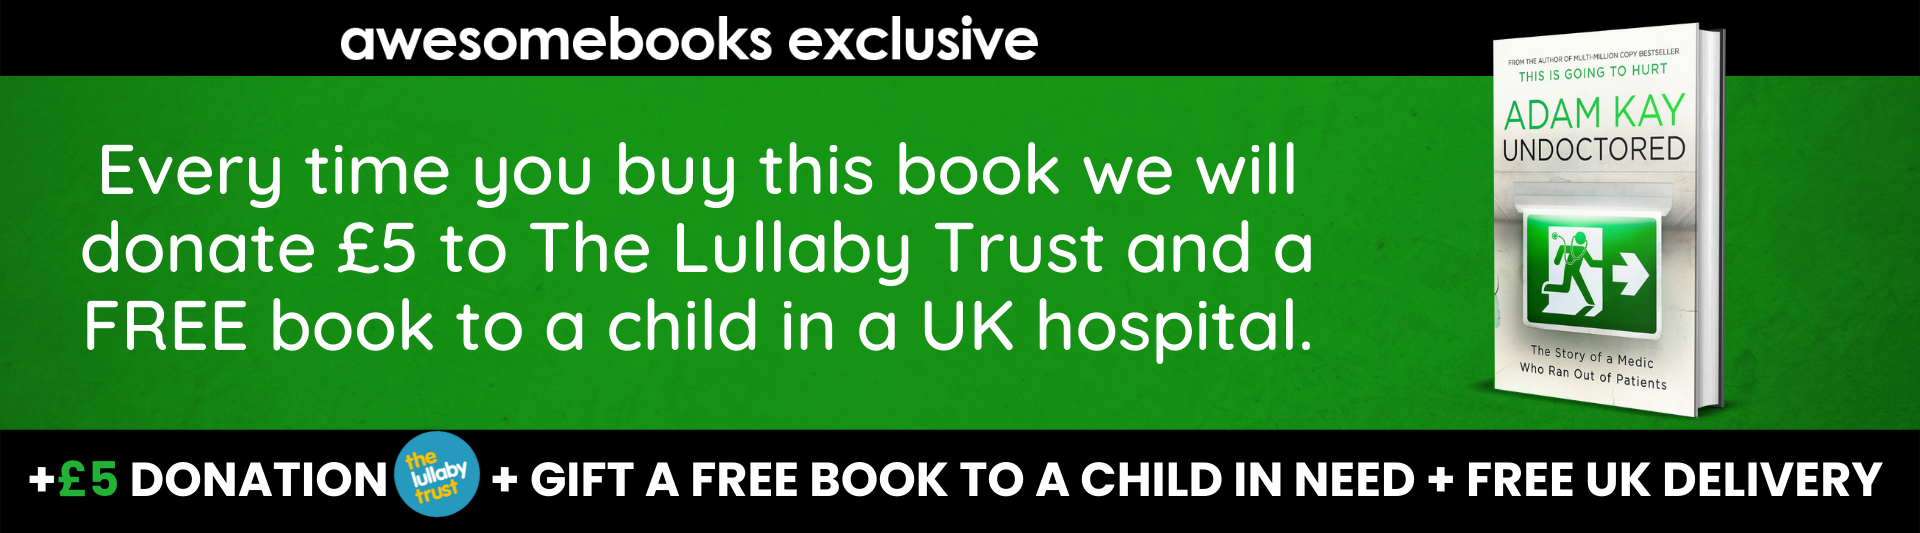 Undoctored: Donate £5 to the Lullaby Trust